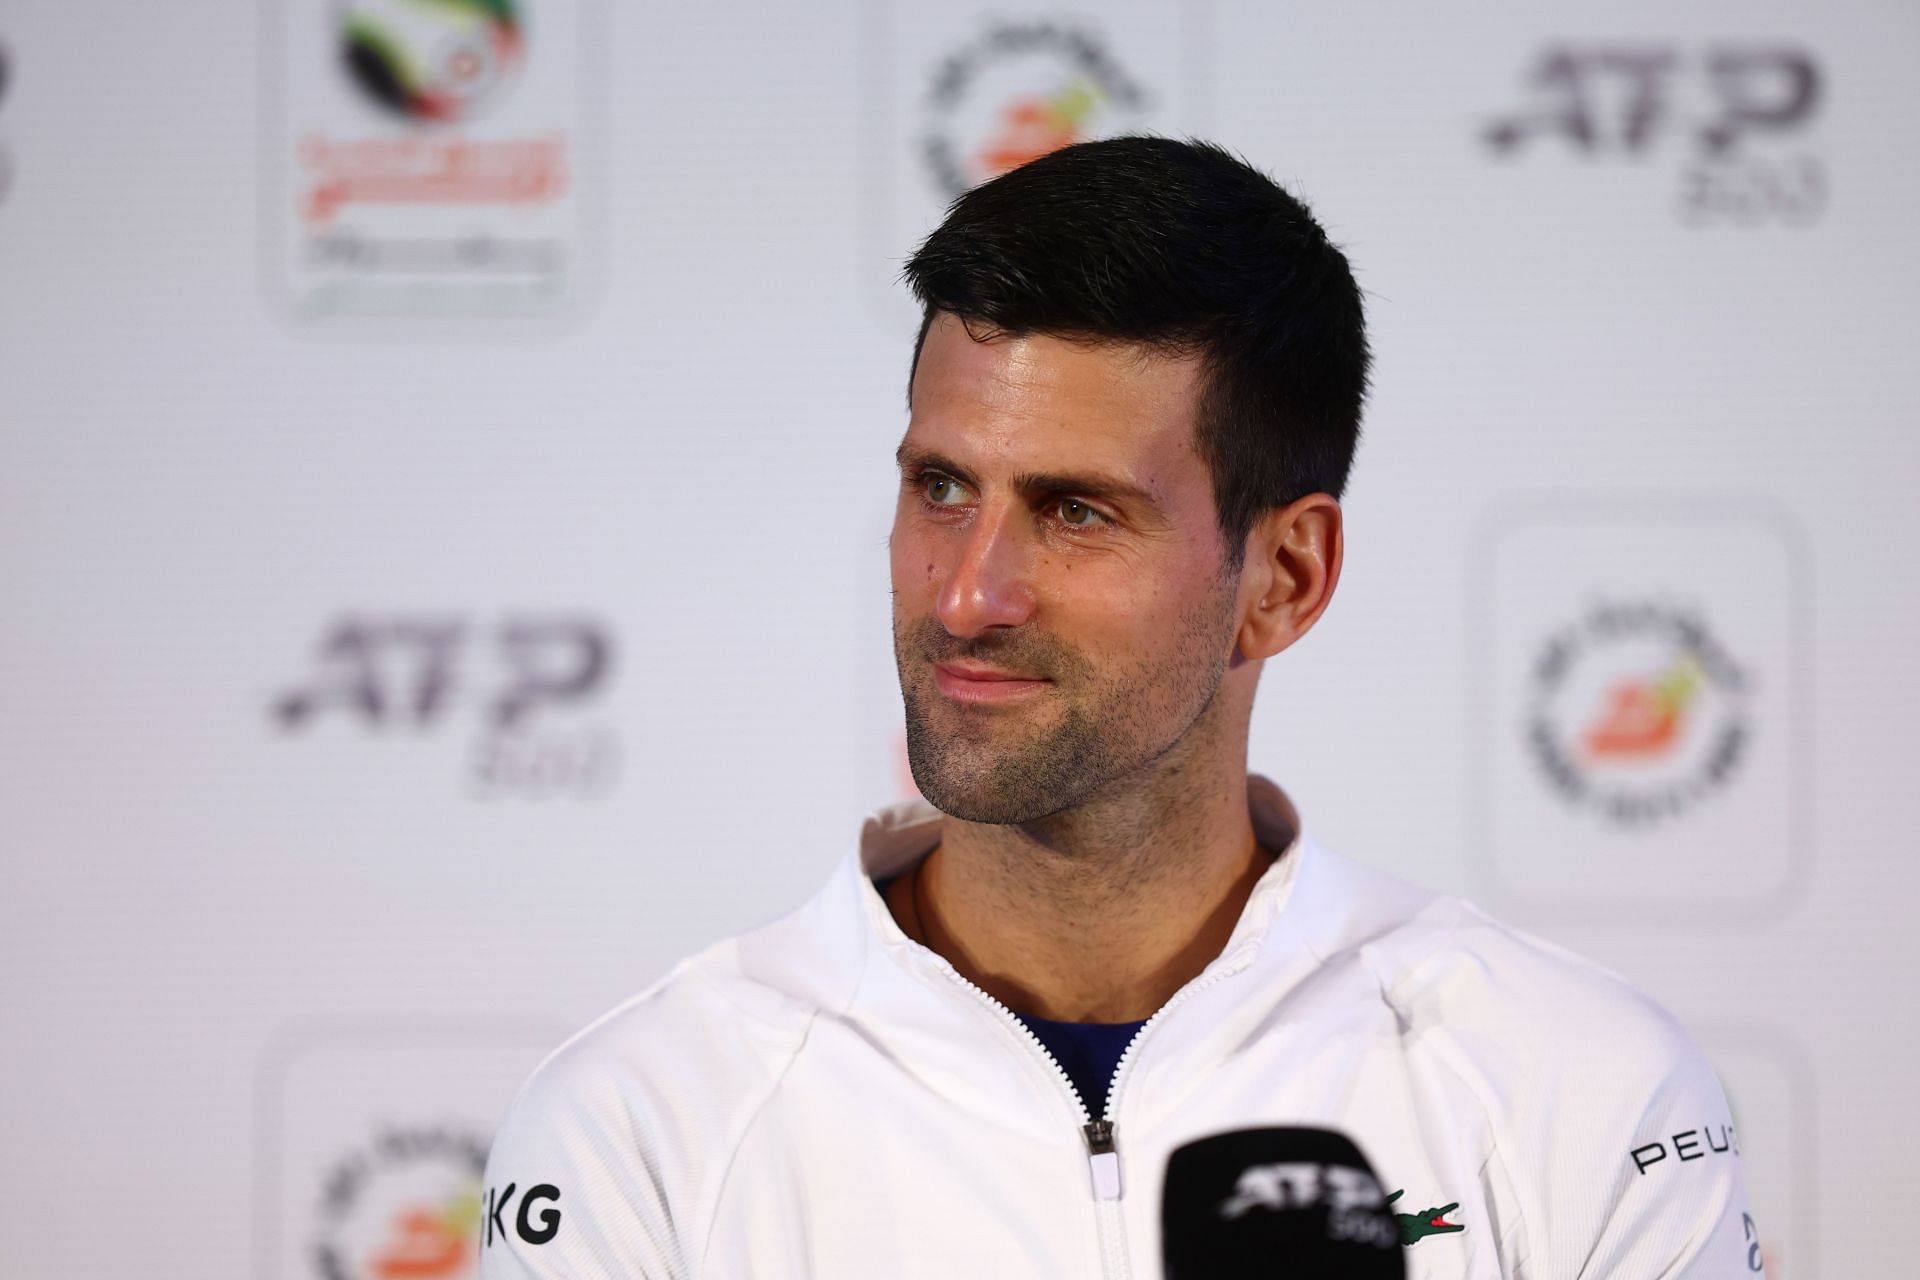 Novak Djokovic could be forced to sit out of the 2022 US Open